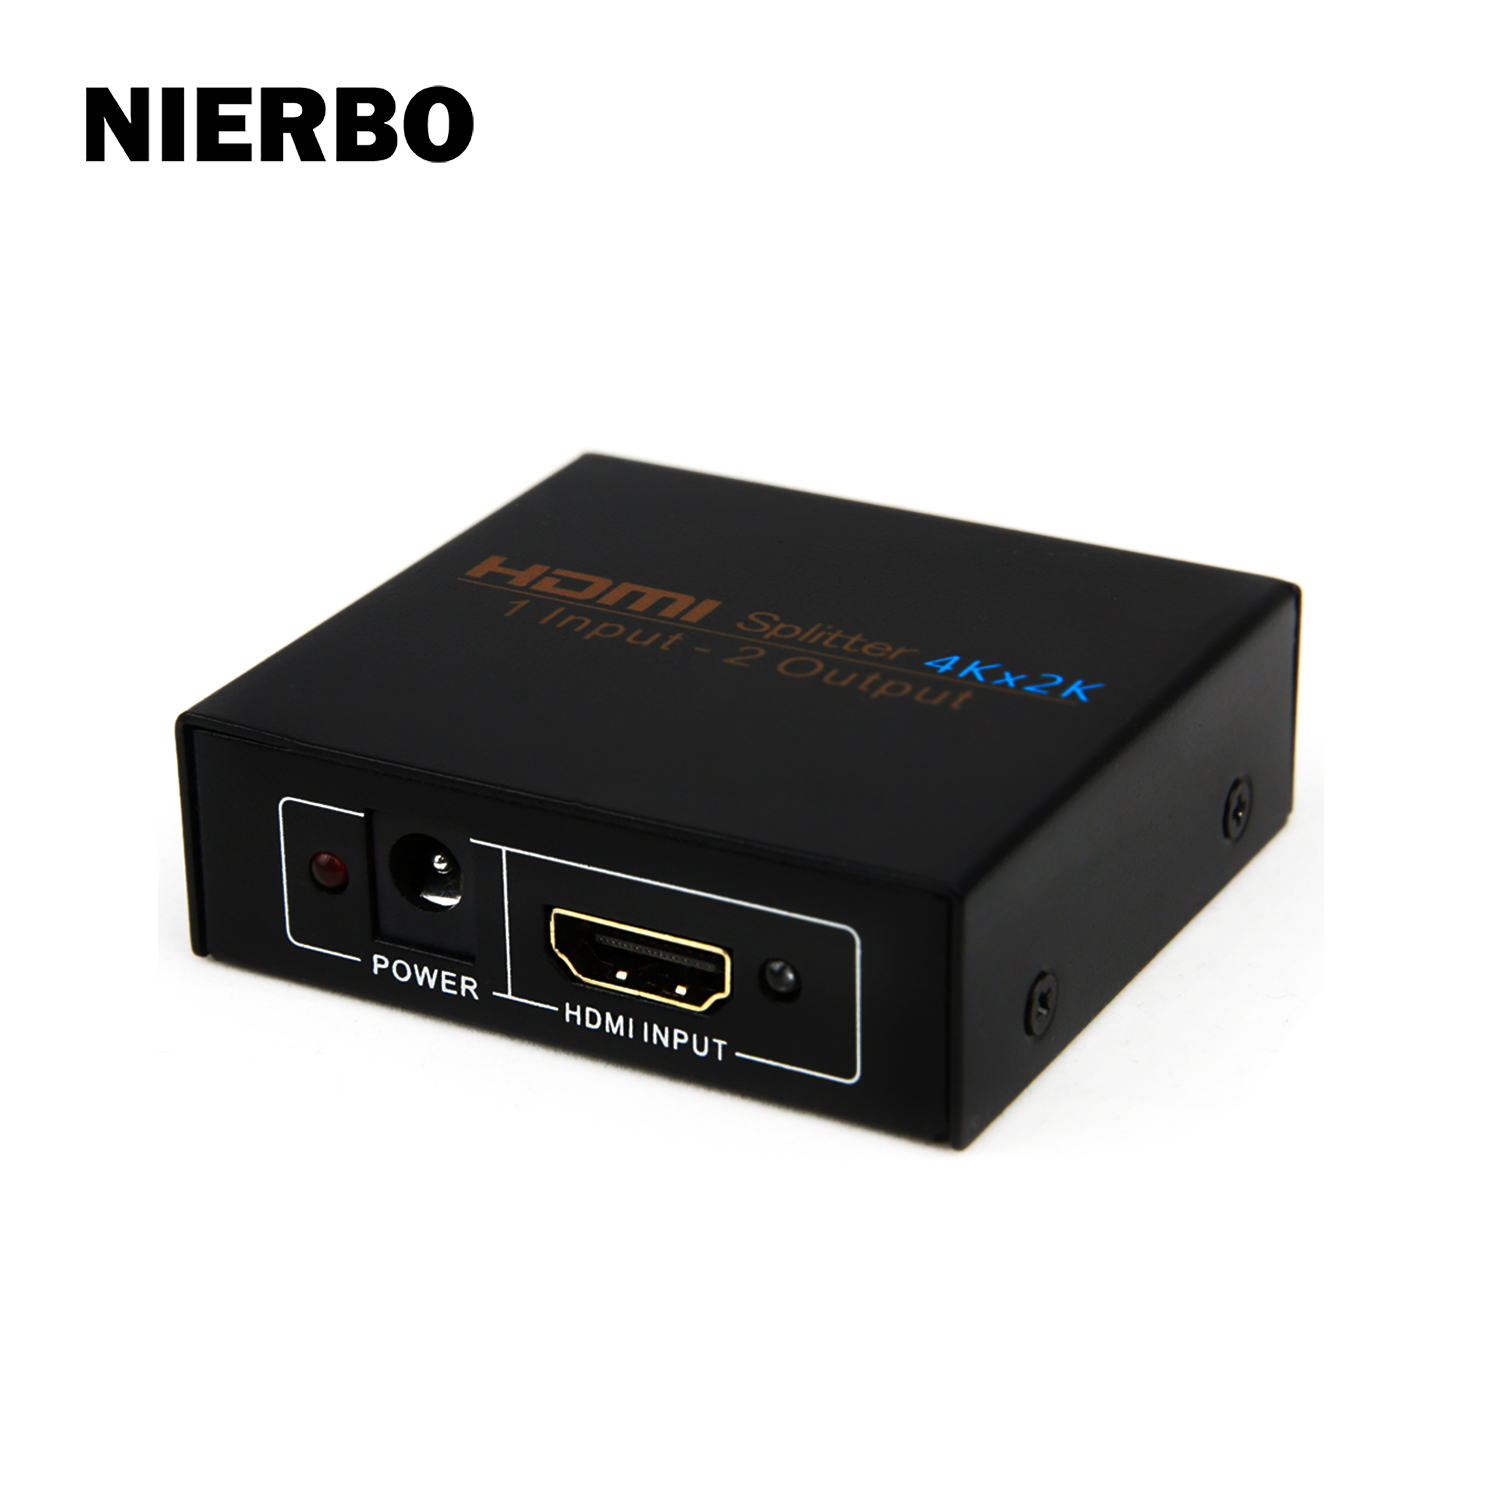 Hdmi Splitter NIERBO 1x2 Powered 4K hdmi Splitter Dual Monitor 1 in 2 out HDMI 4Kx2K@30HZ Duplicating Video and Audio for Full HD 1080P, Splitter